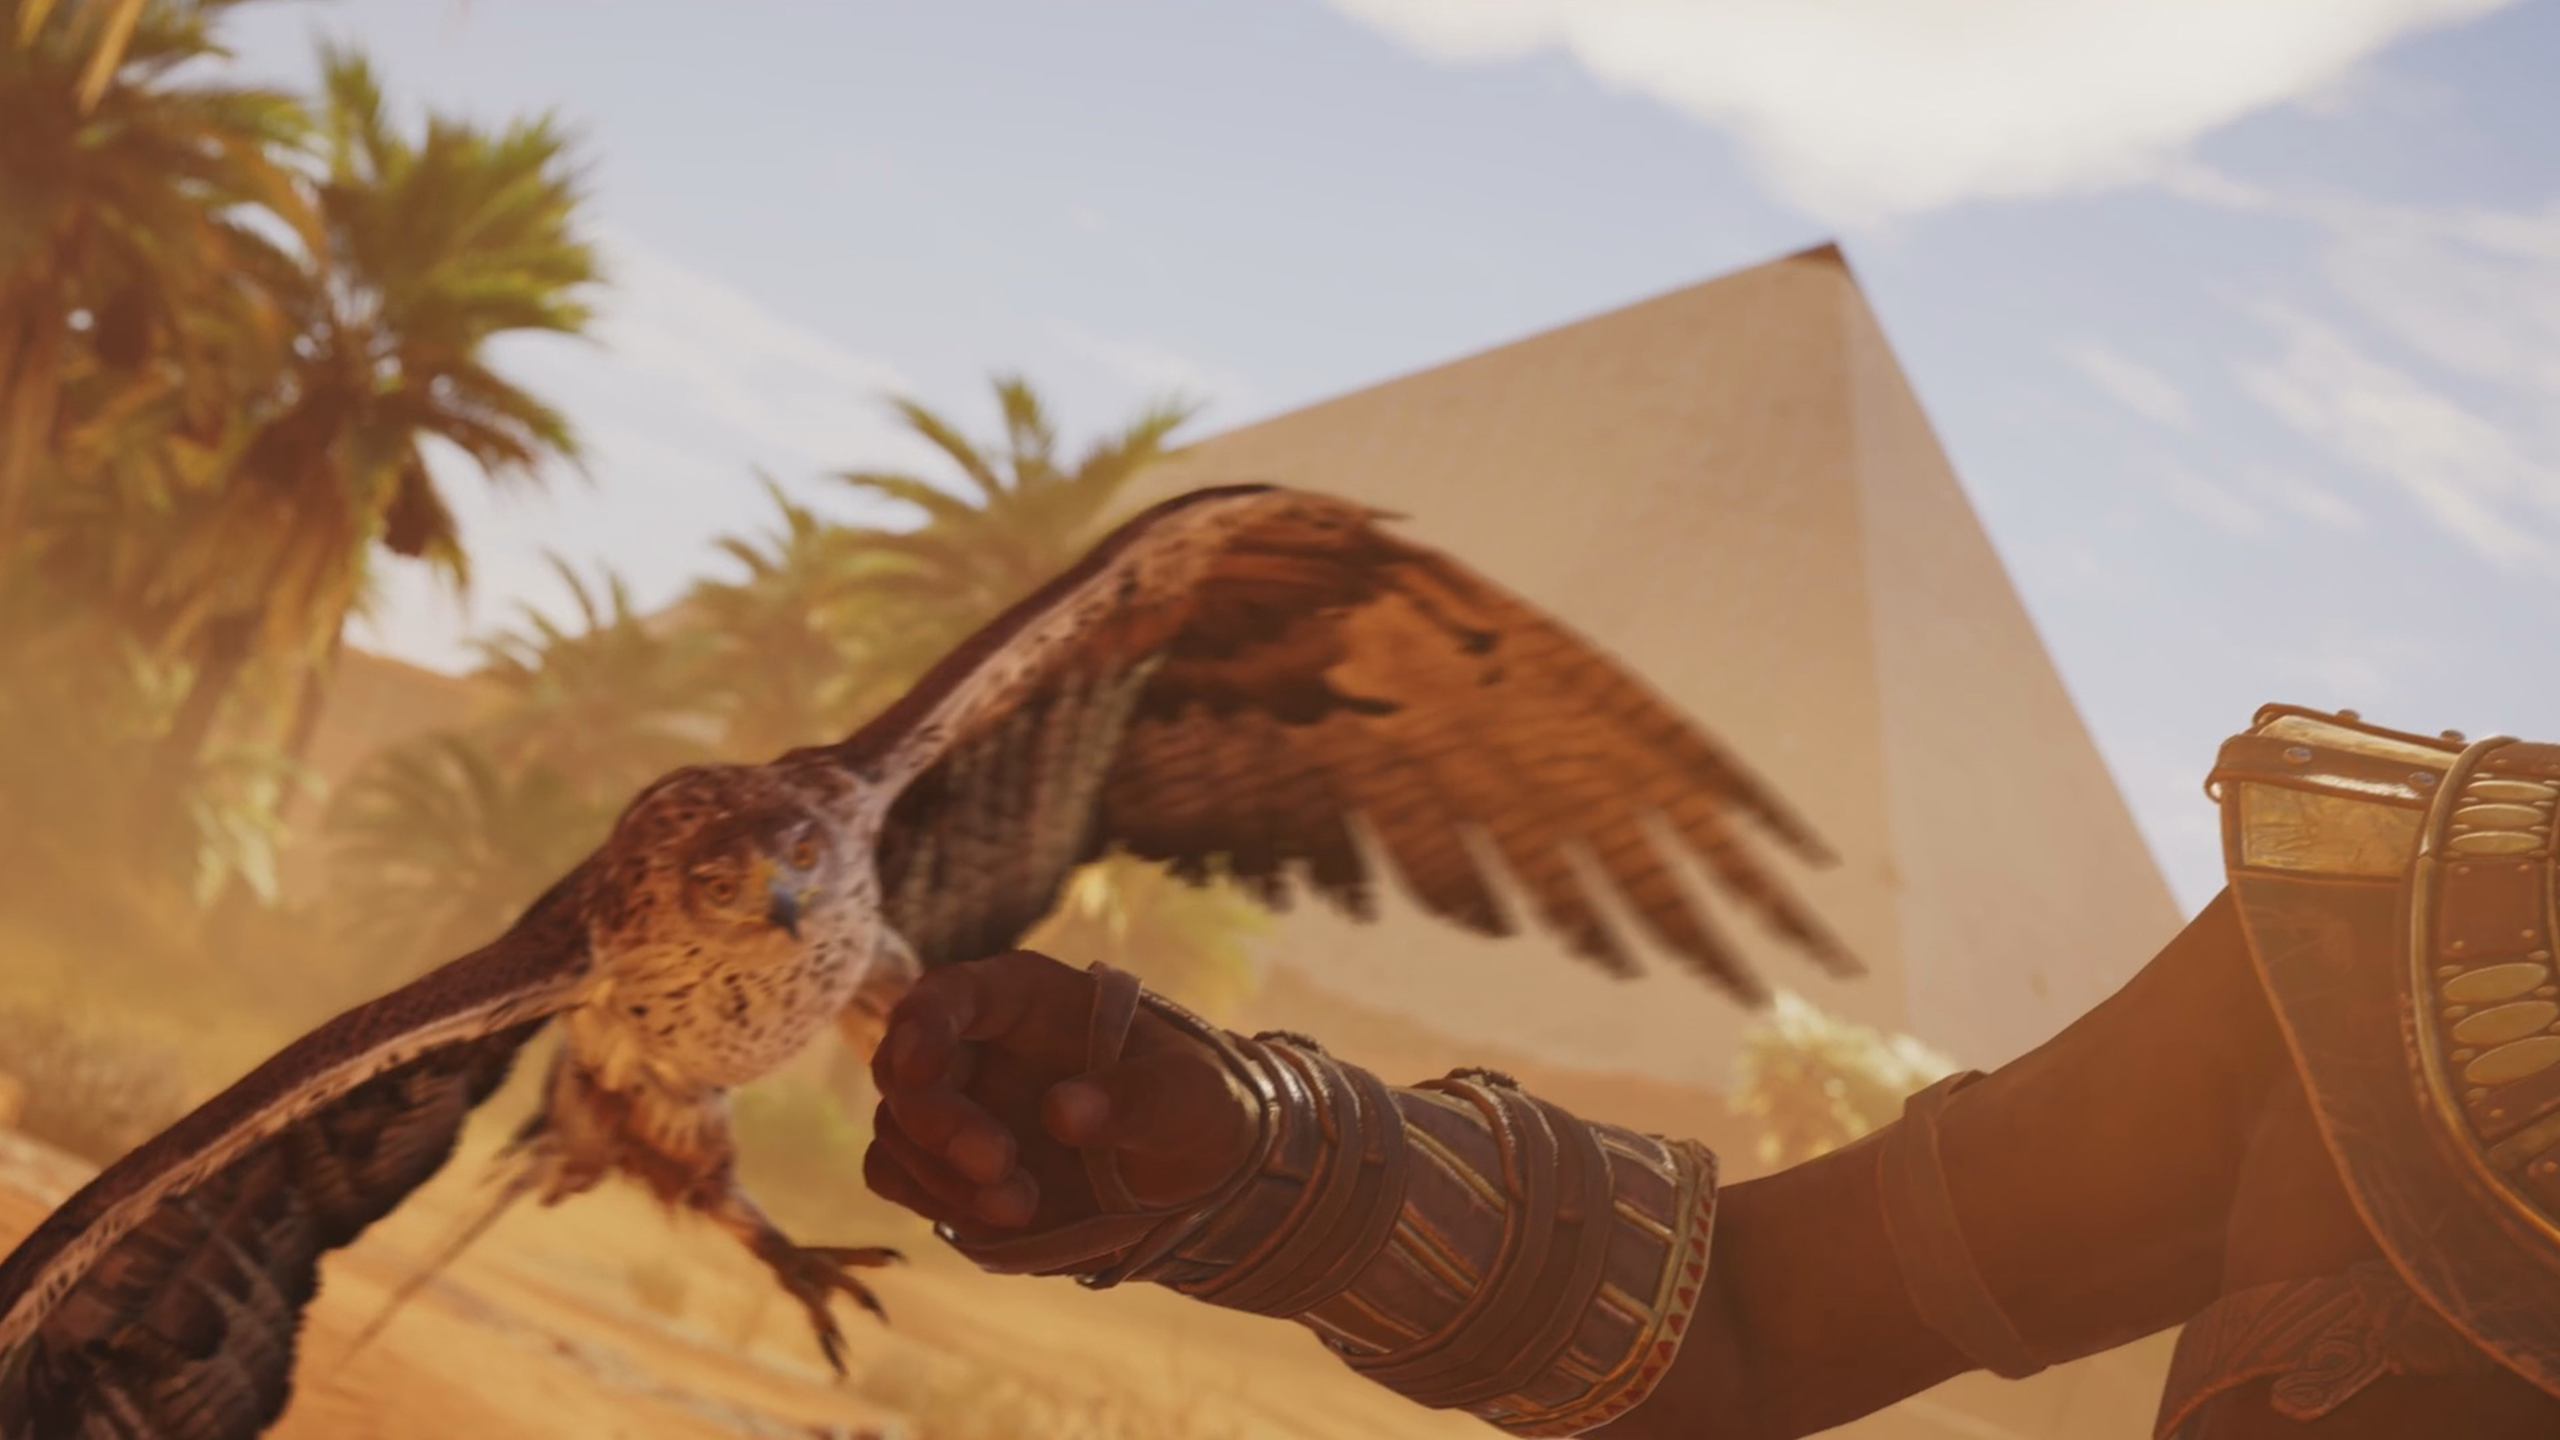 Video Game Assassin's Creed Origins HD Wallpaper | Background Image